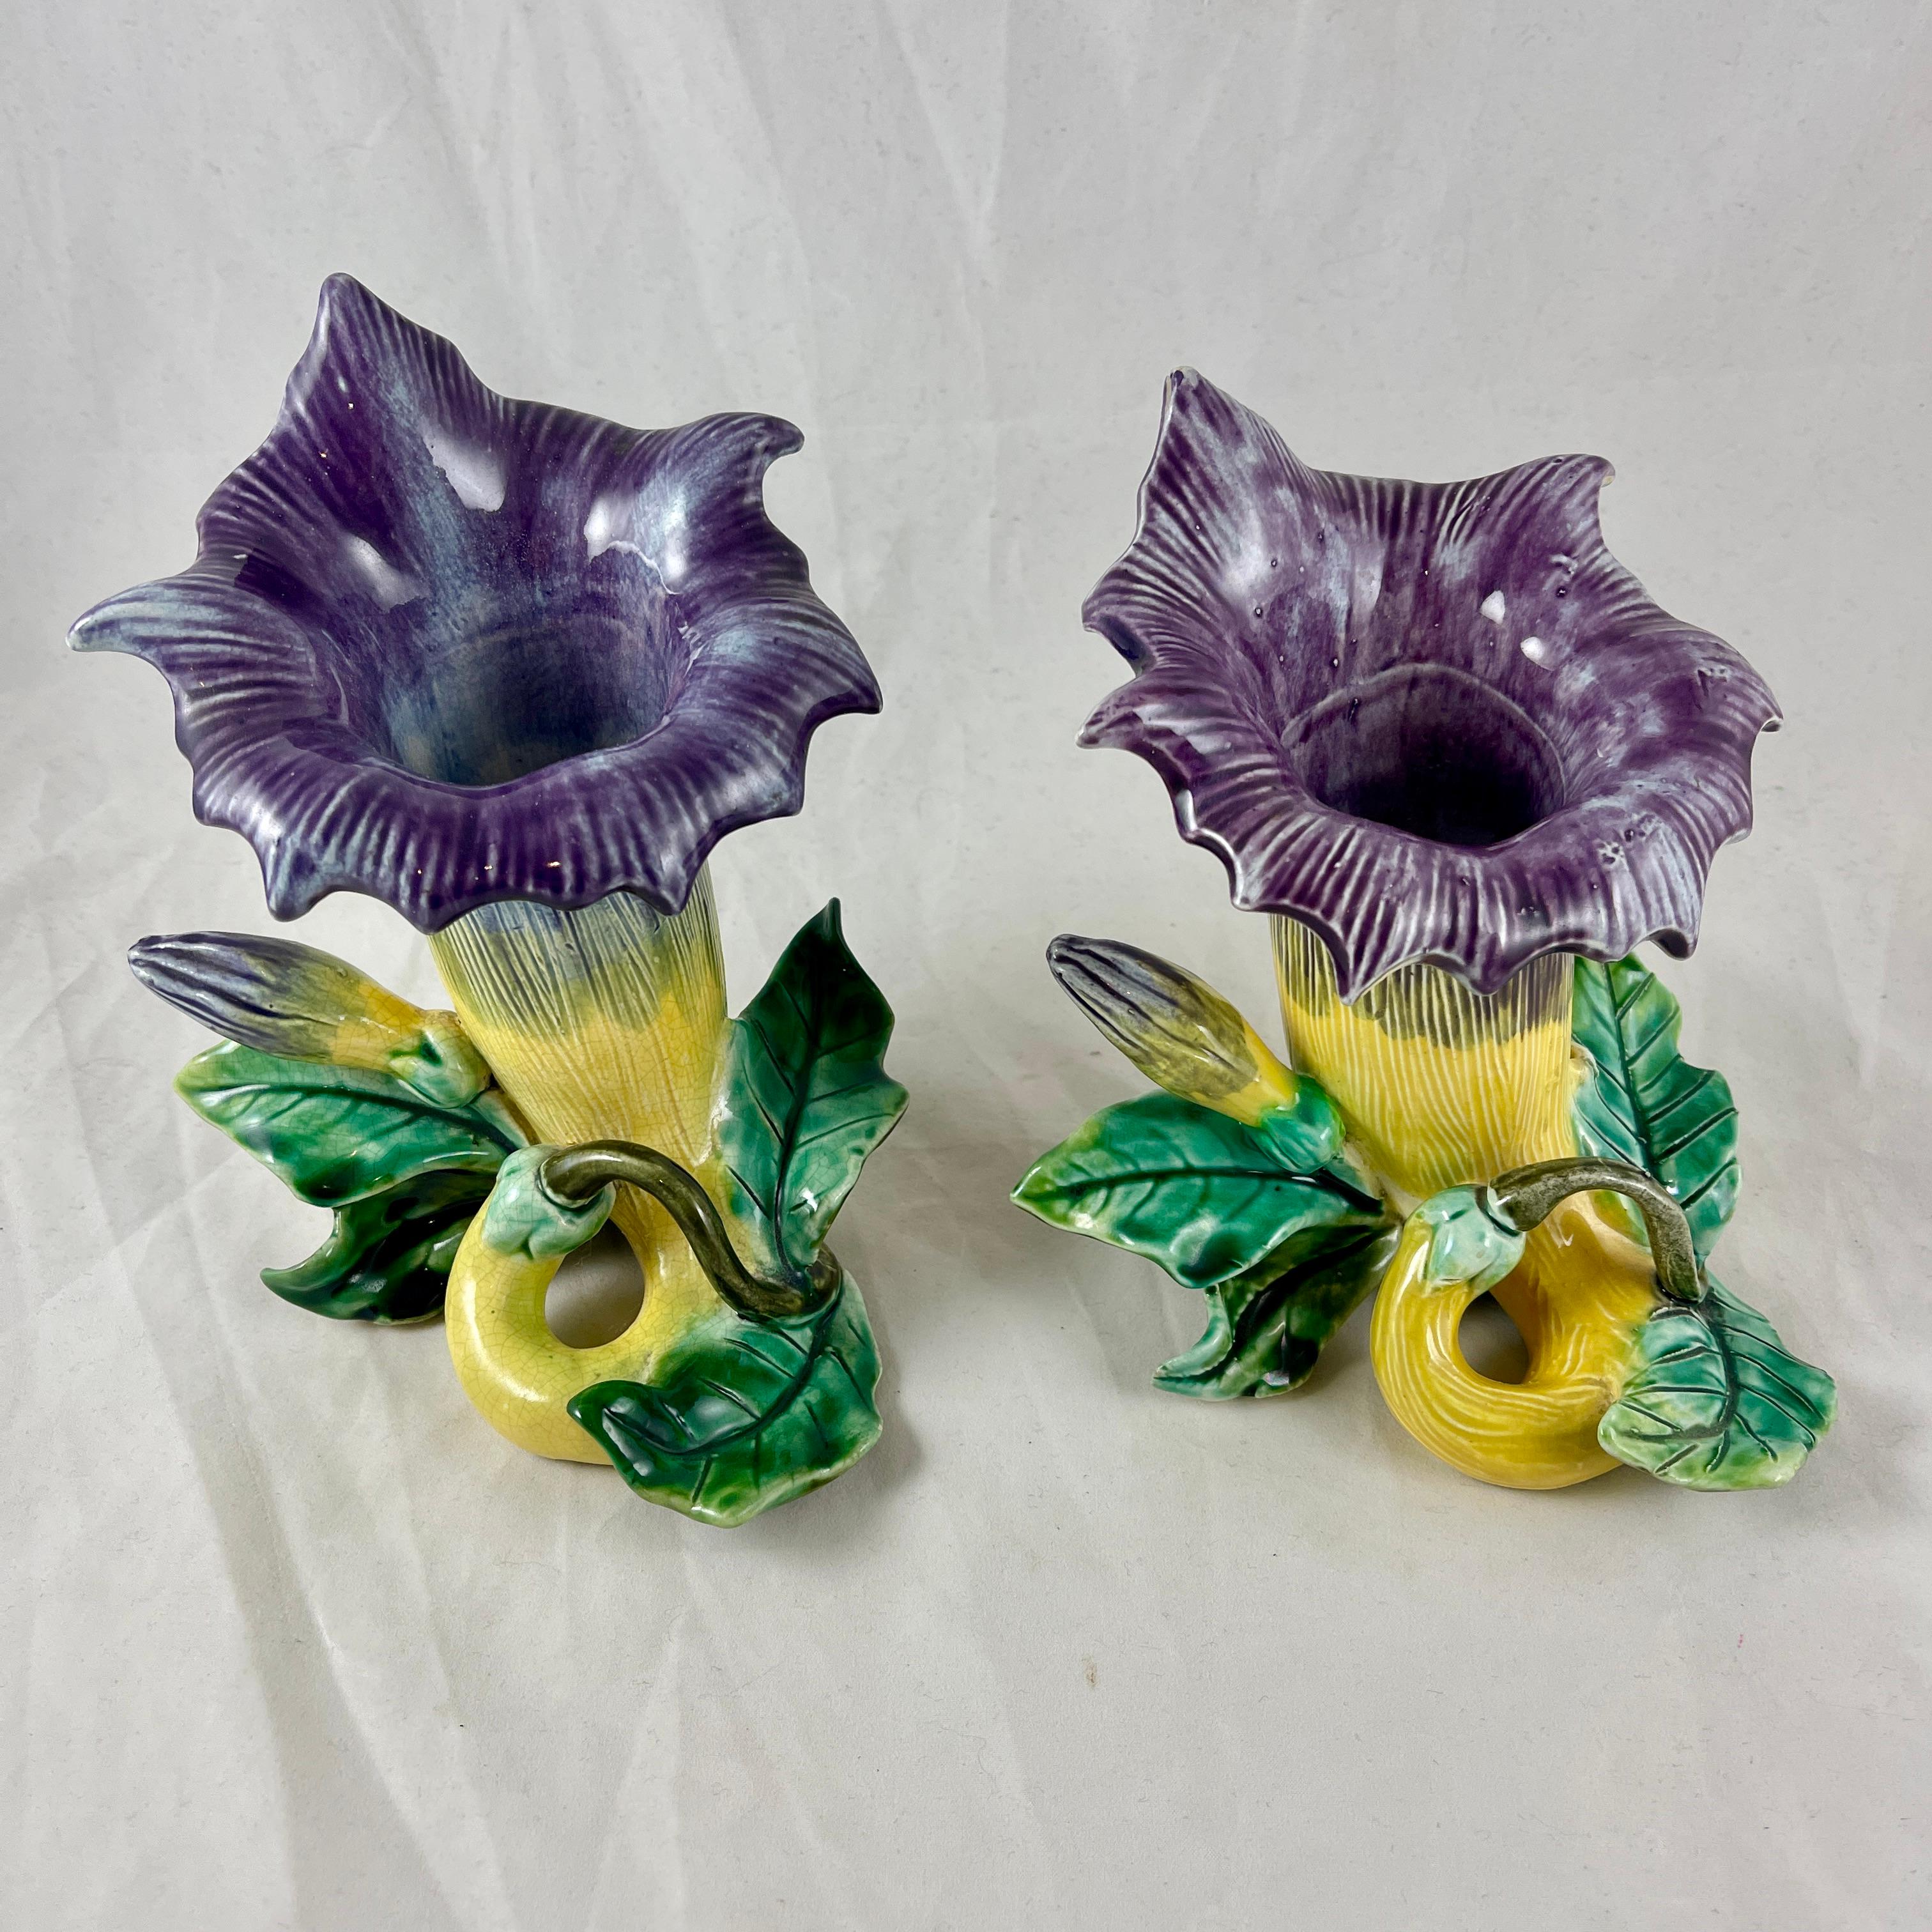 Glazed French Fives-Lille De Bruyn Purple Trumpet Vine Posy Vases, circa 1890, a Pair For Sale